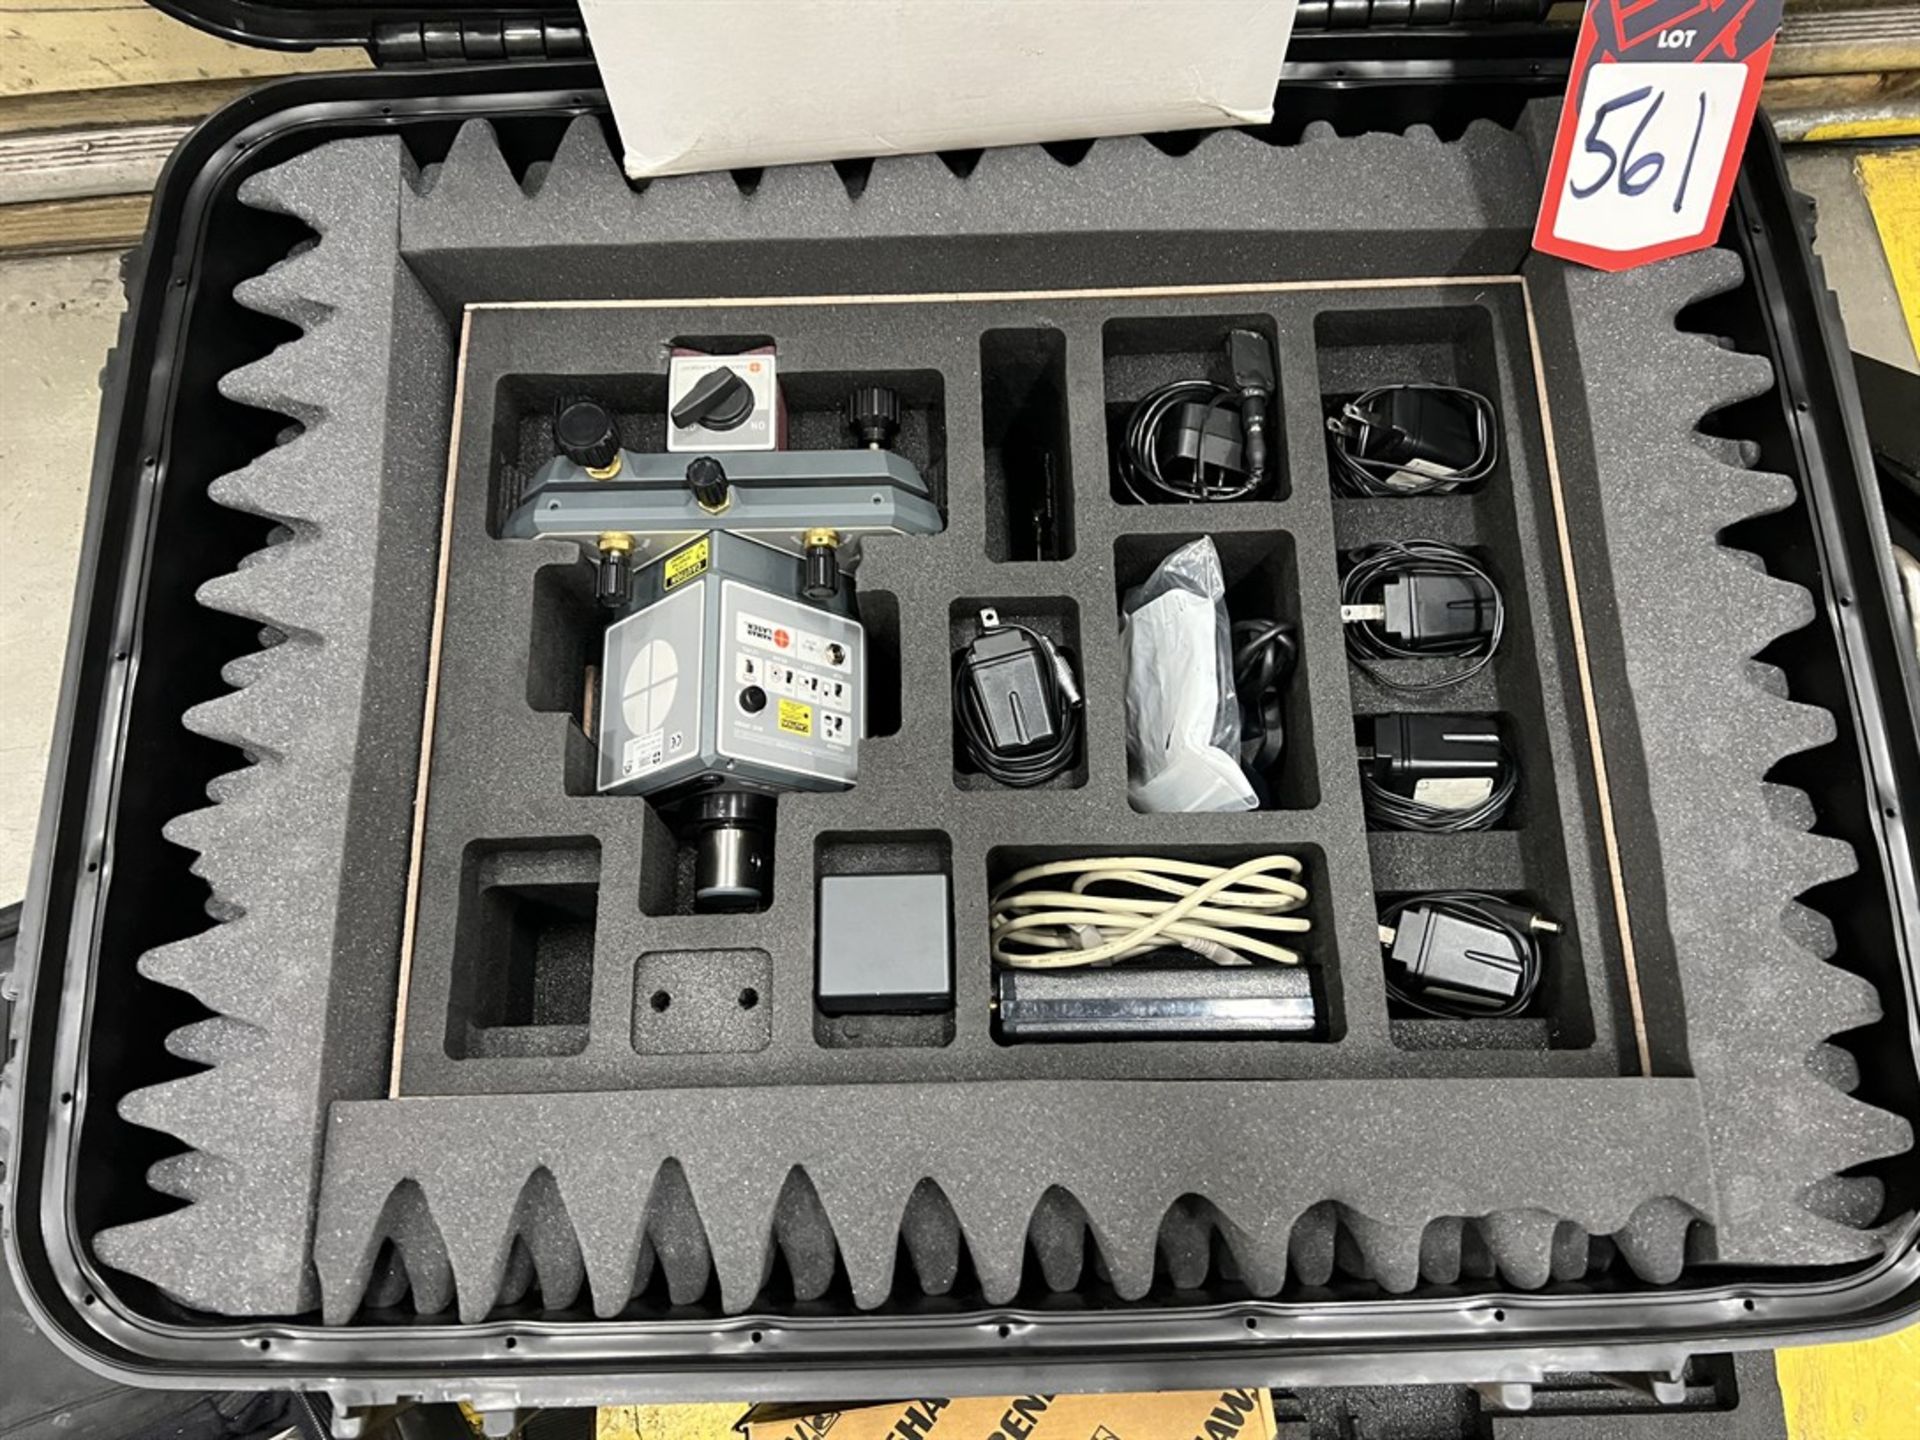 2019 HAMAR LASER L-743 Ultra Precision Triple Scan Laser Alignment System, s/n 08115753-371, w/ - Image 2 of 6